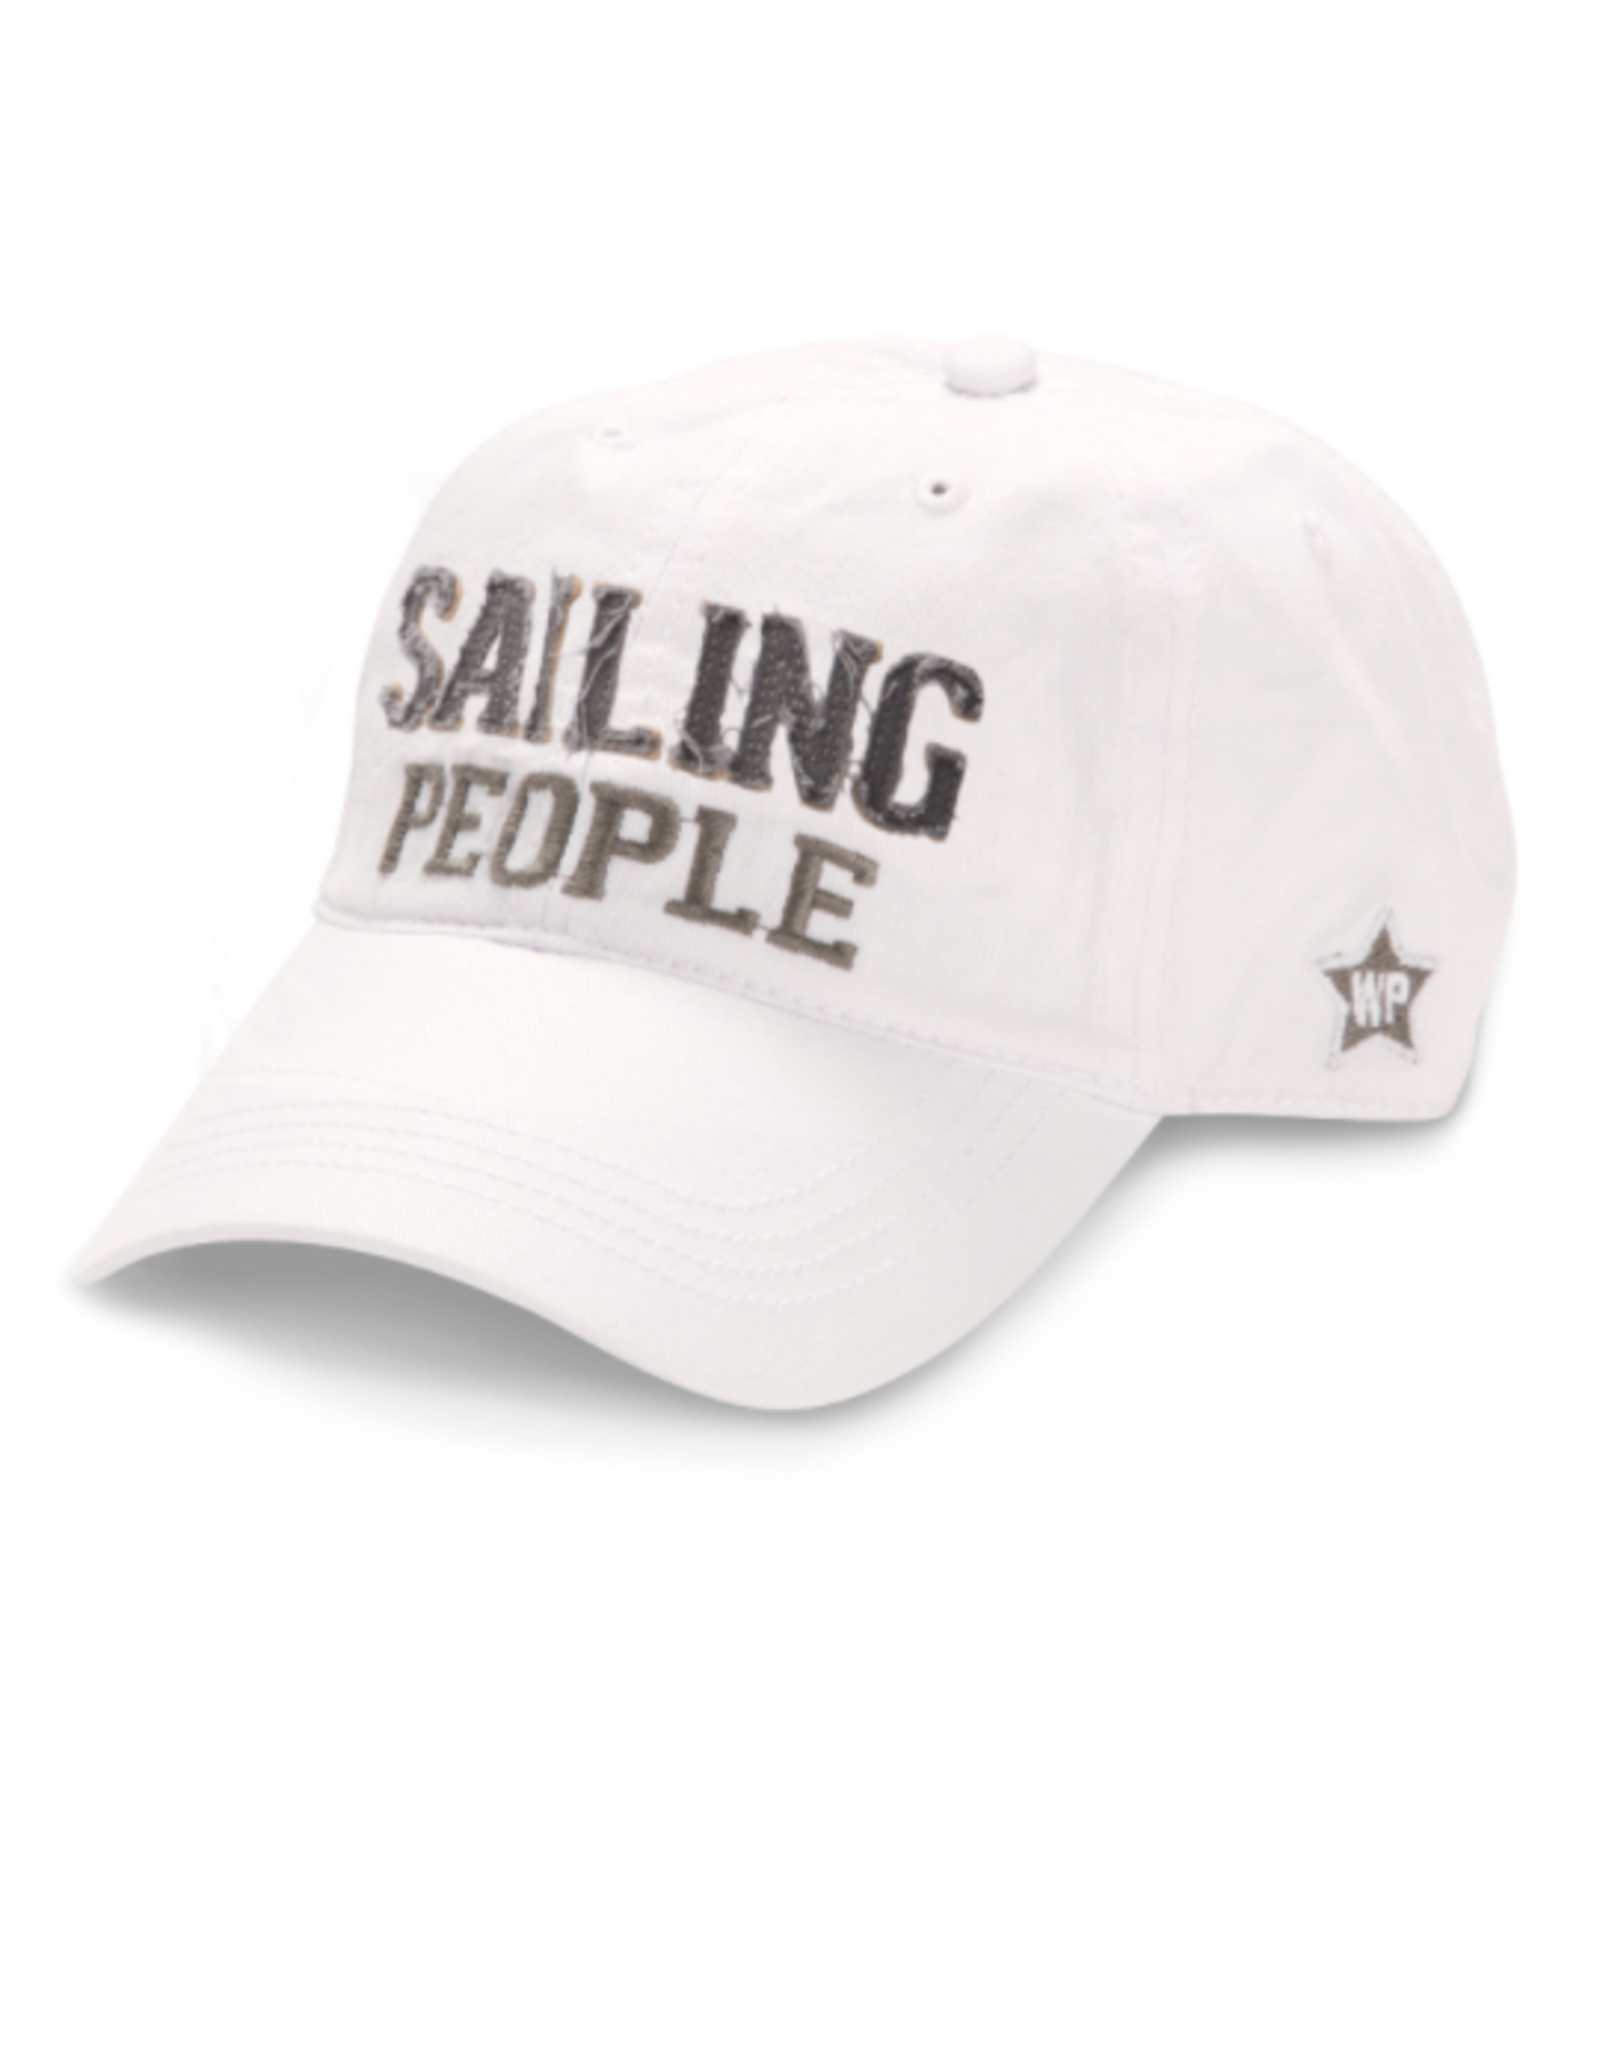 We People Sailing People Ball Hat, white